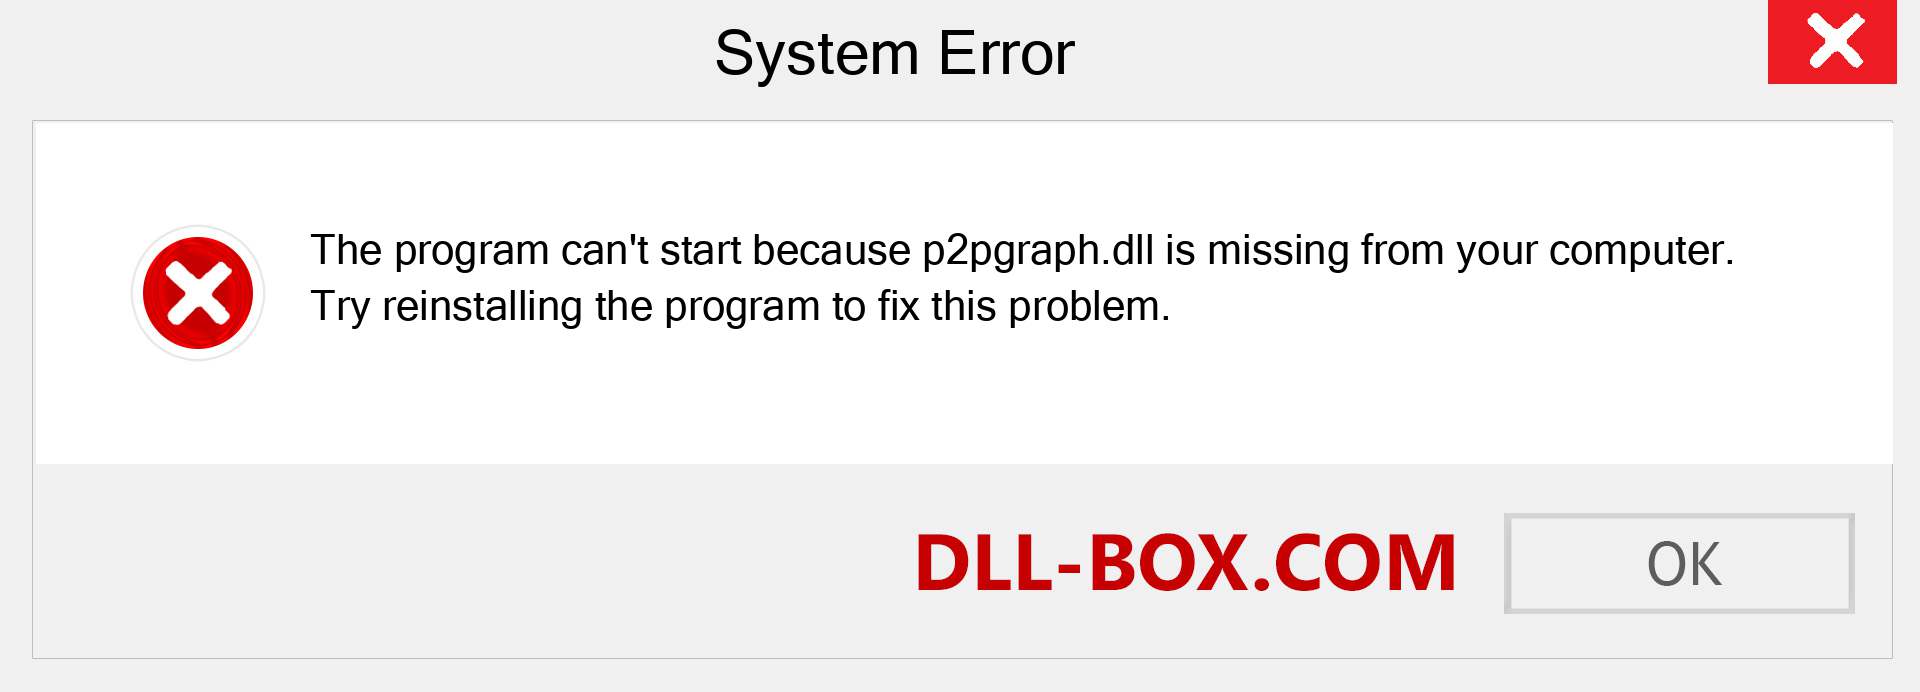  p2pgraph.dll file is missing?. Download for Windows 7, 8, 10 - Fix  p2pgraph dll Missing Error on Windows, photos, images